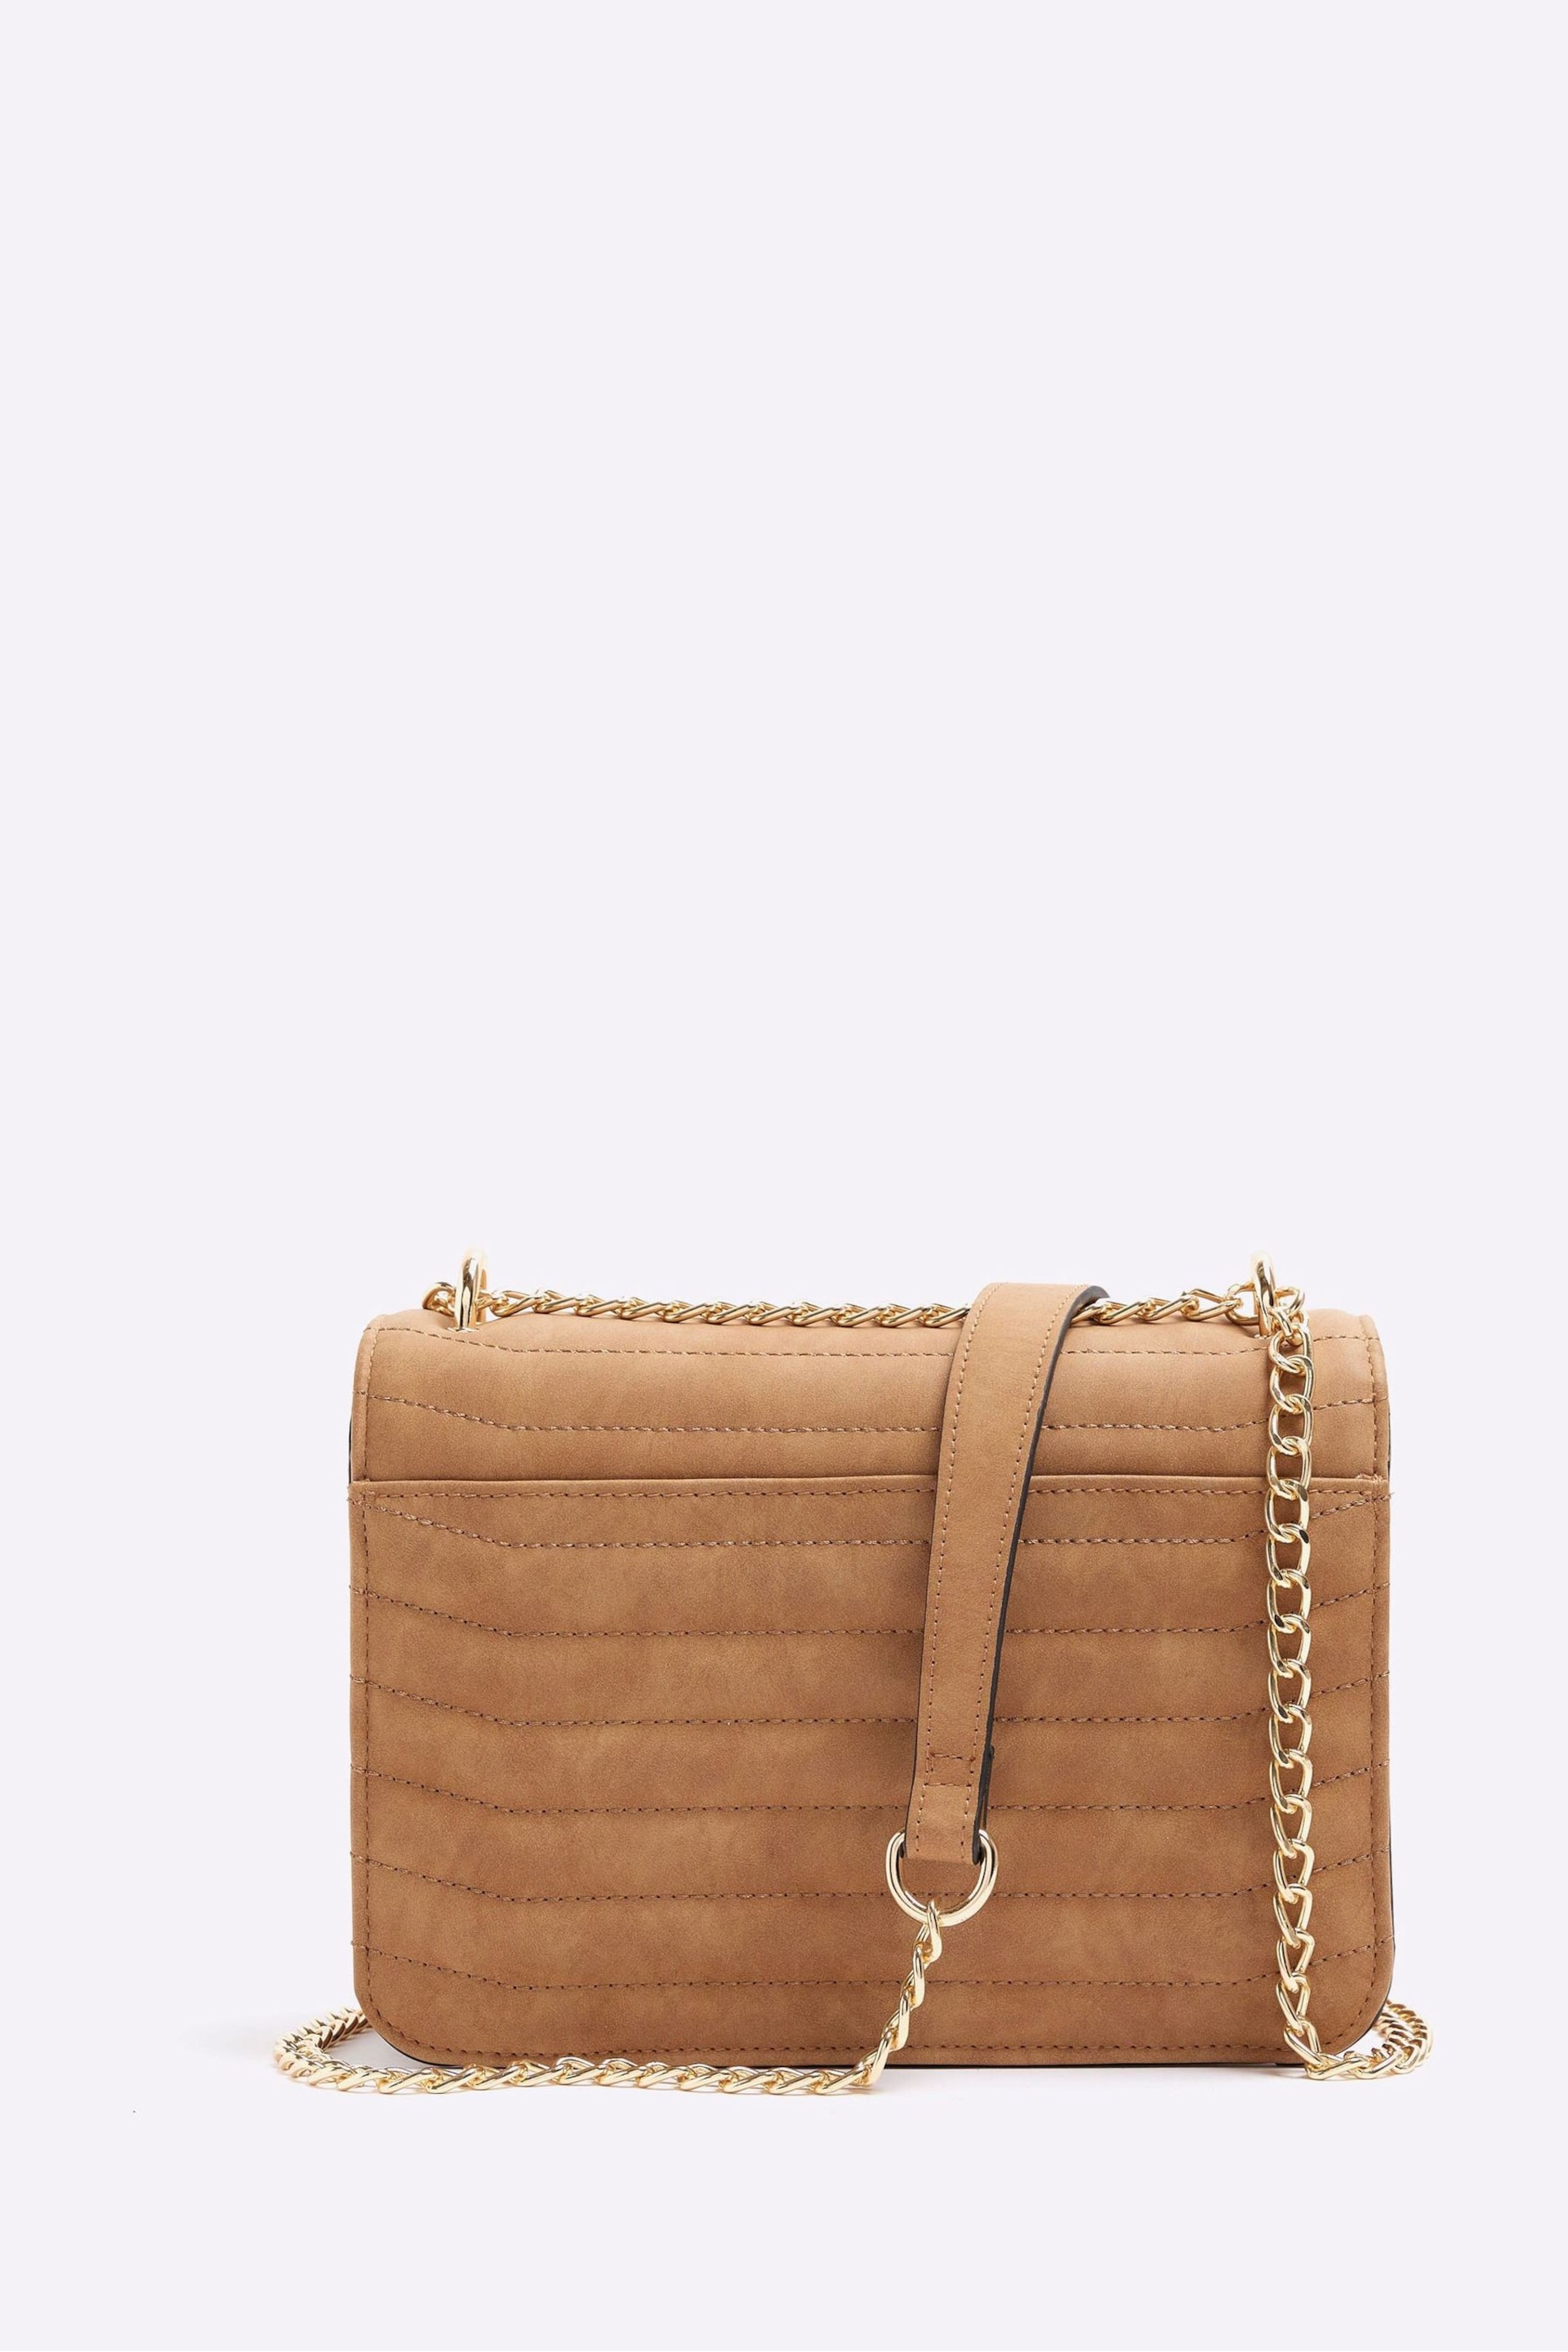 River Island Brown Quilted Chain Shoulder Bag - Image 3 of 4